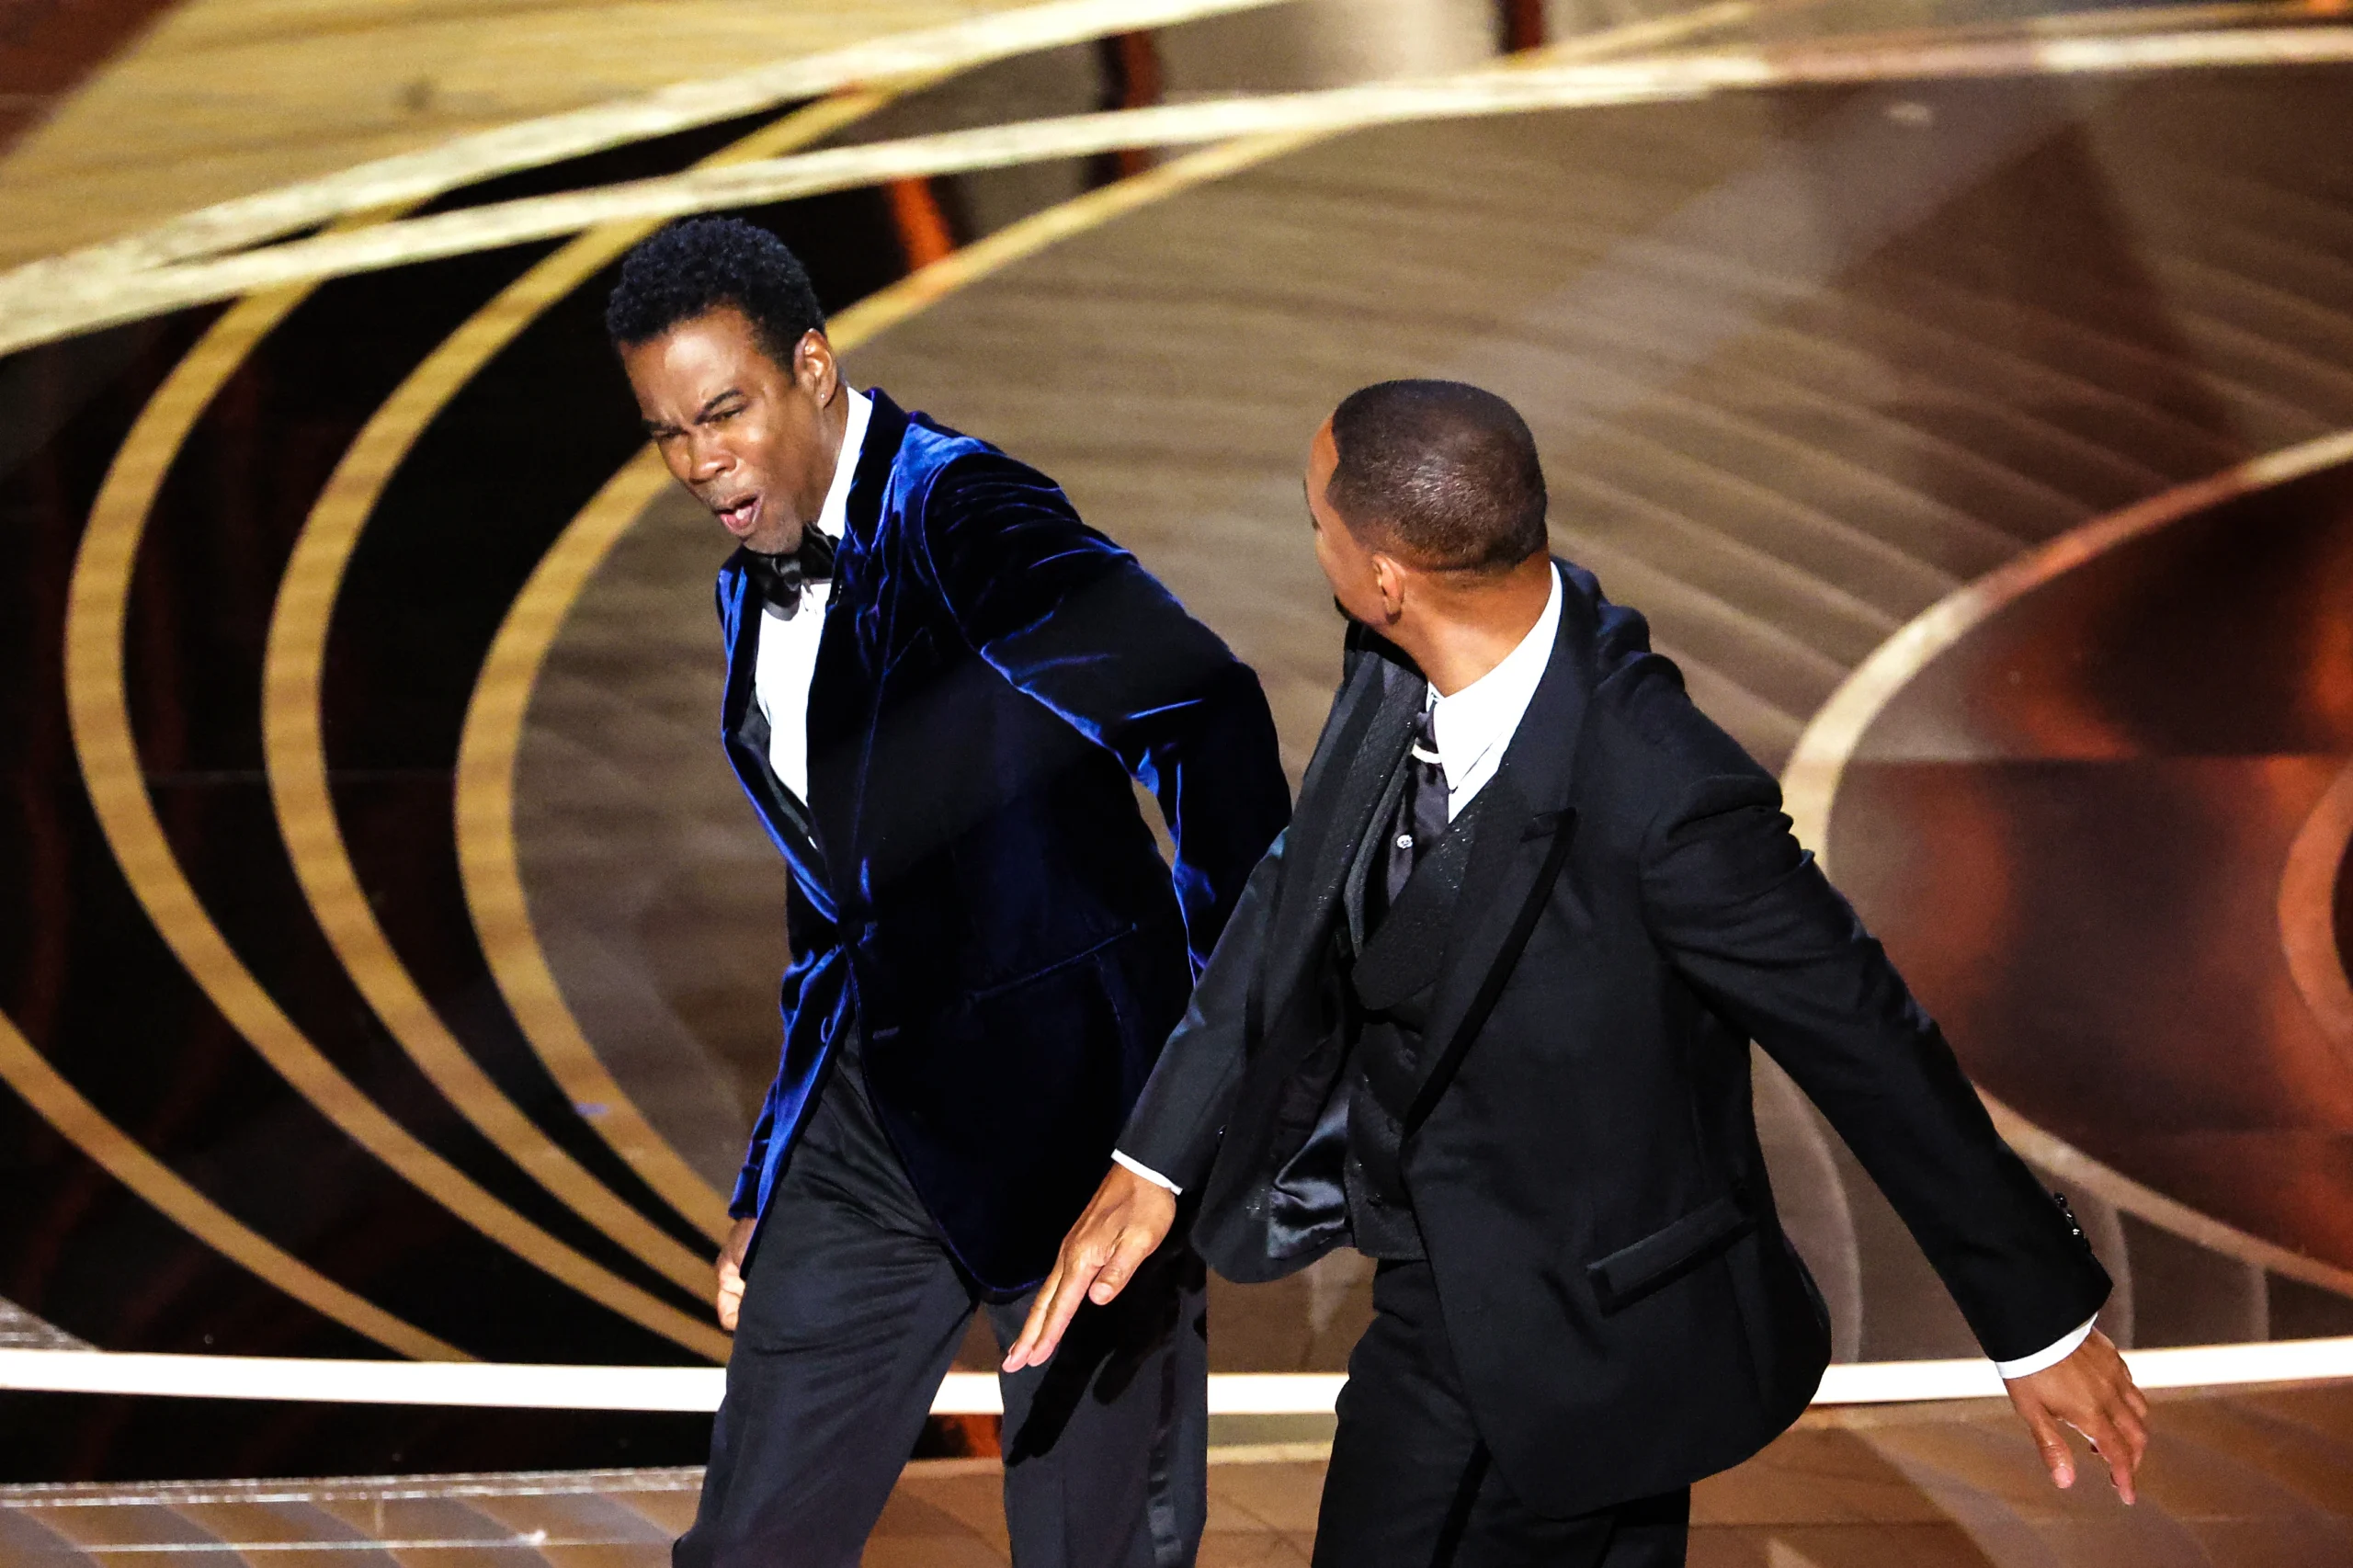 Will Smith slaps Chris Rock at the Oscars...What's your opinion?